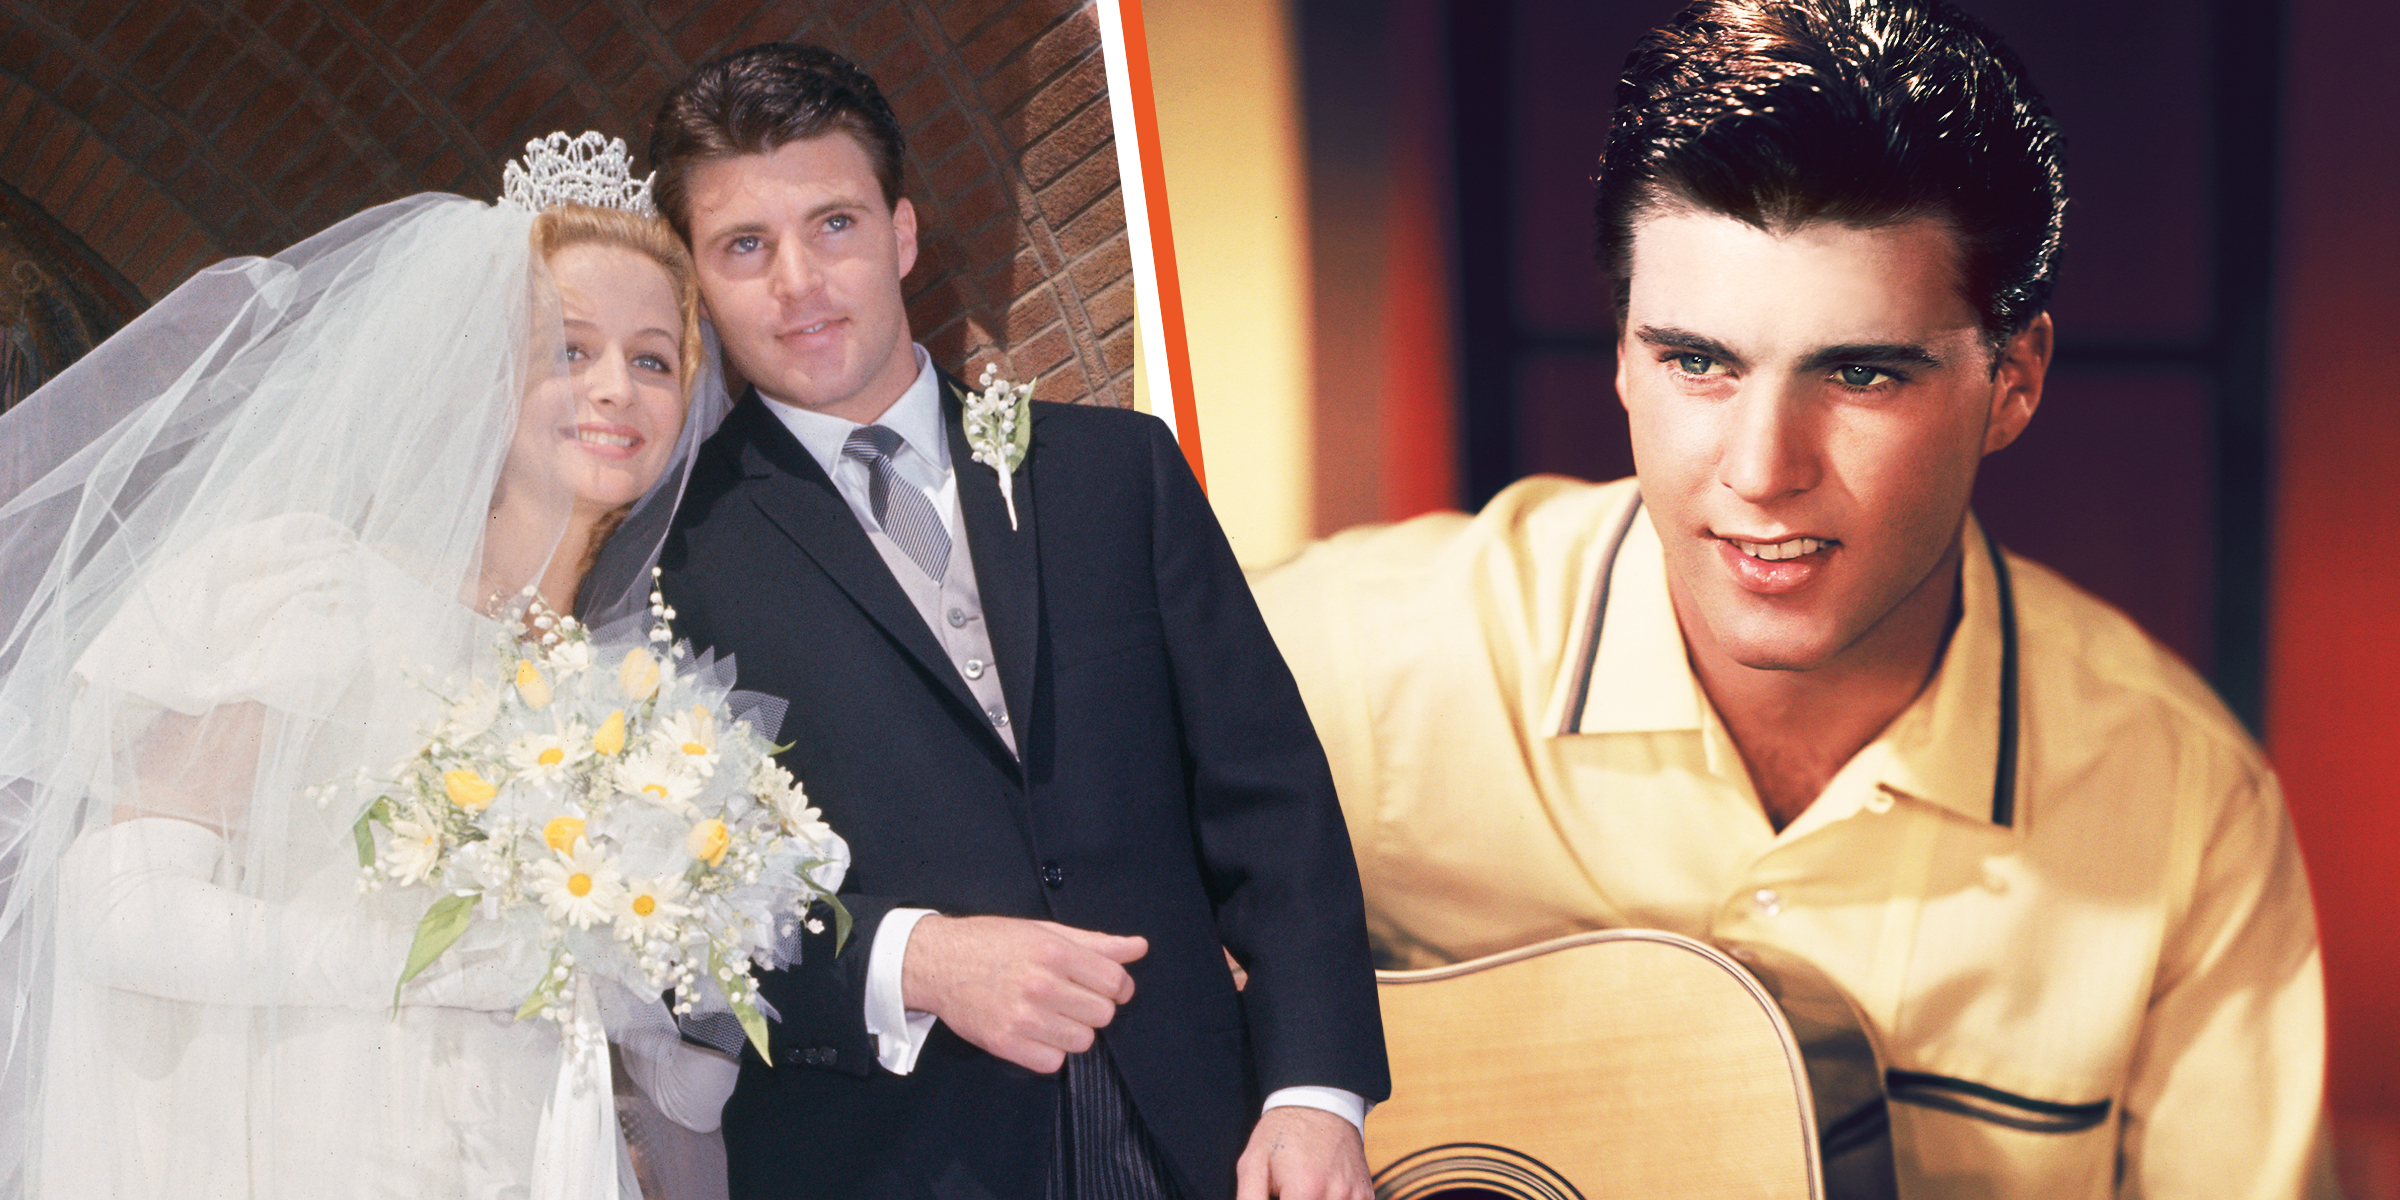 Ricky Nelson and his ex-wife Kristin | Source: Getty Images